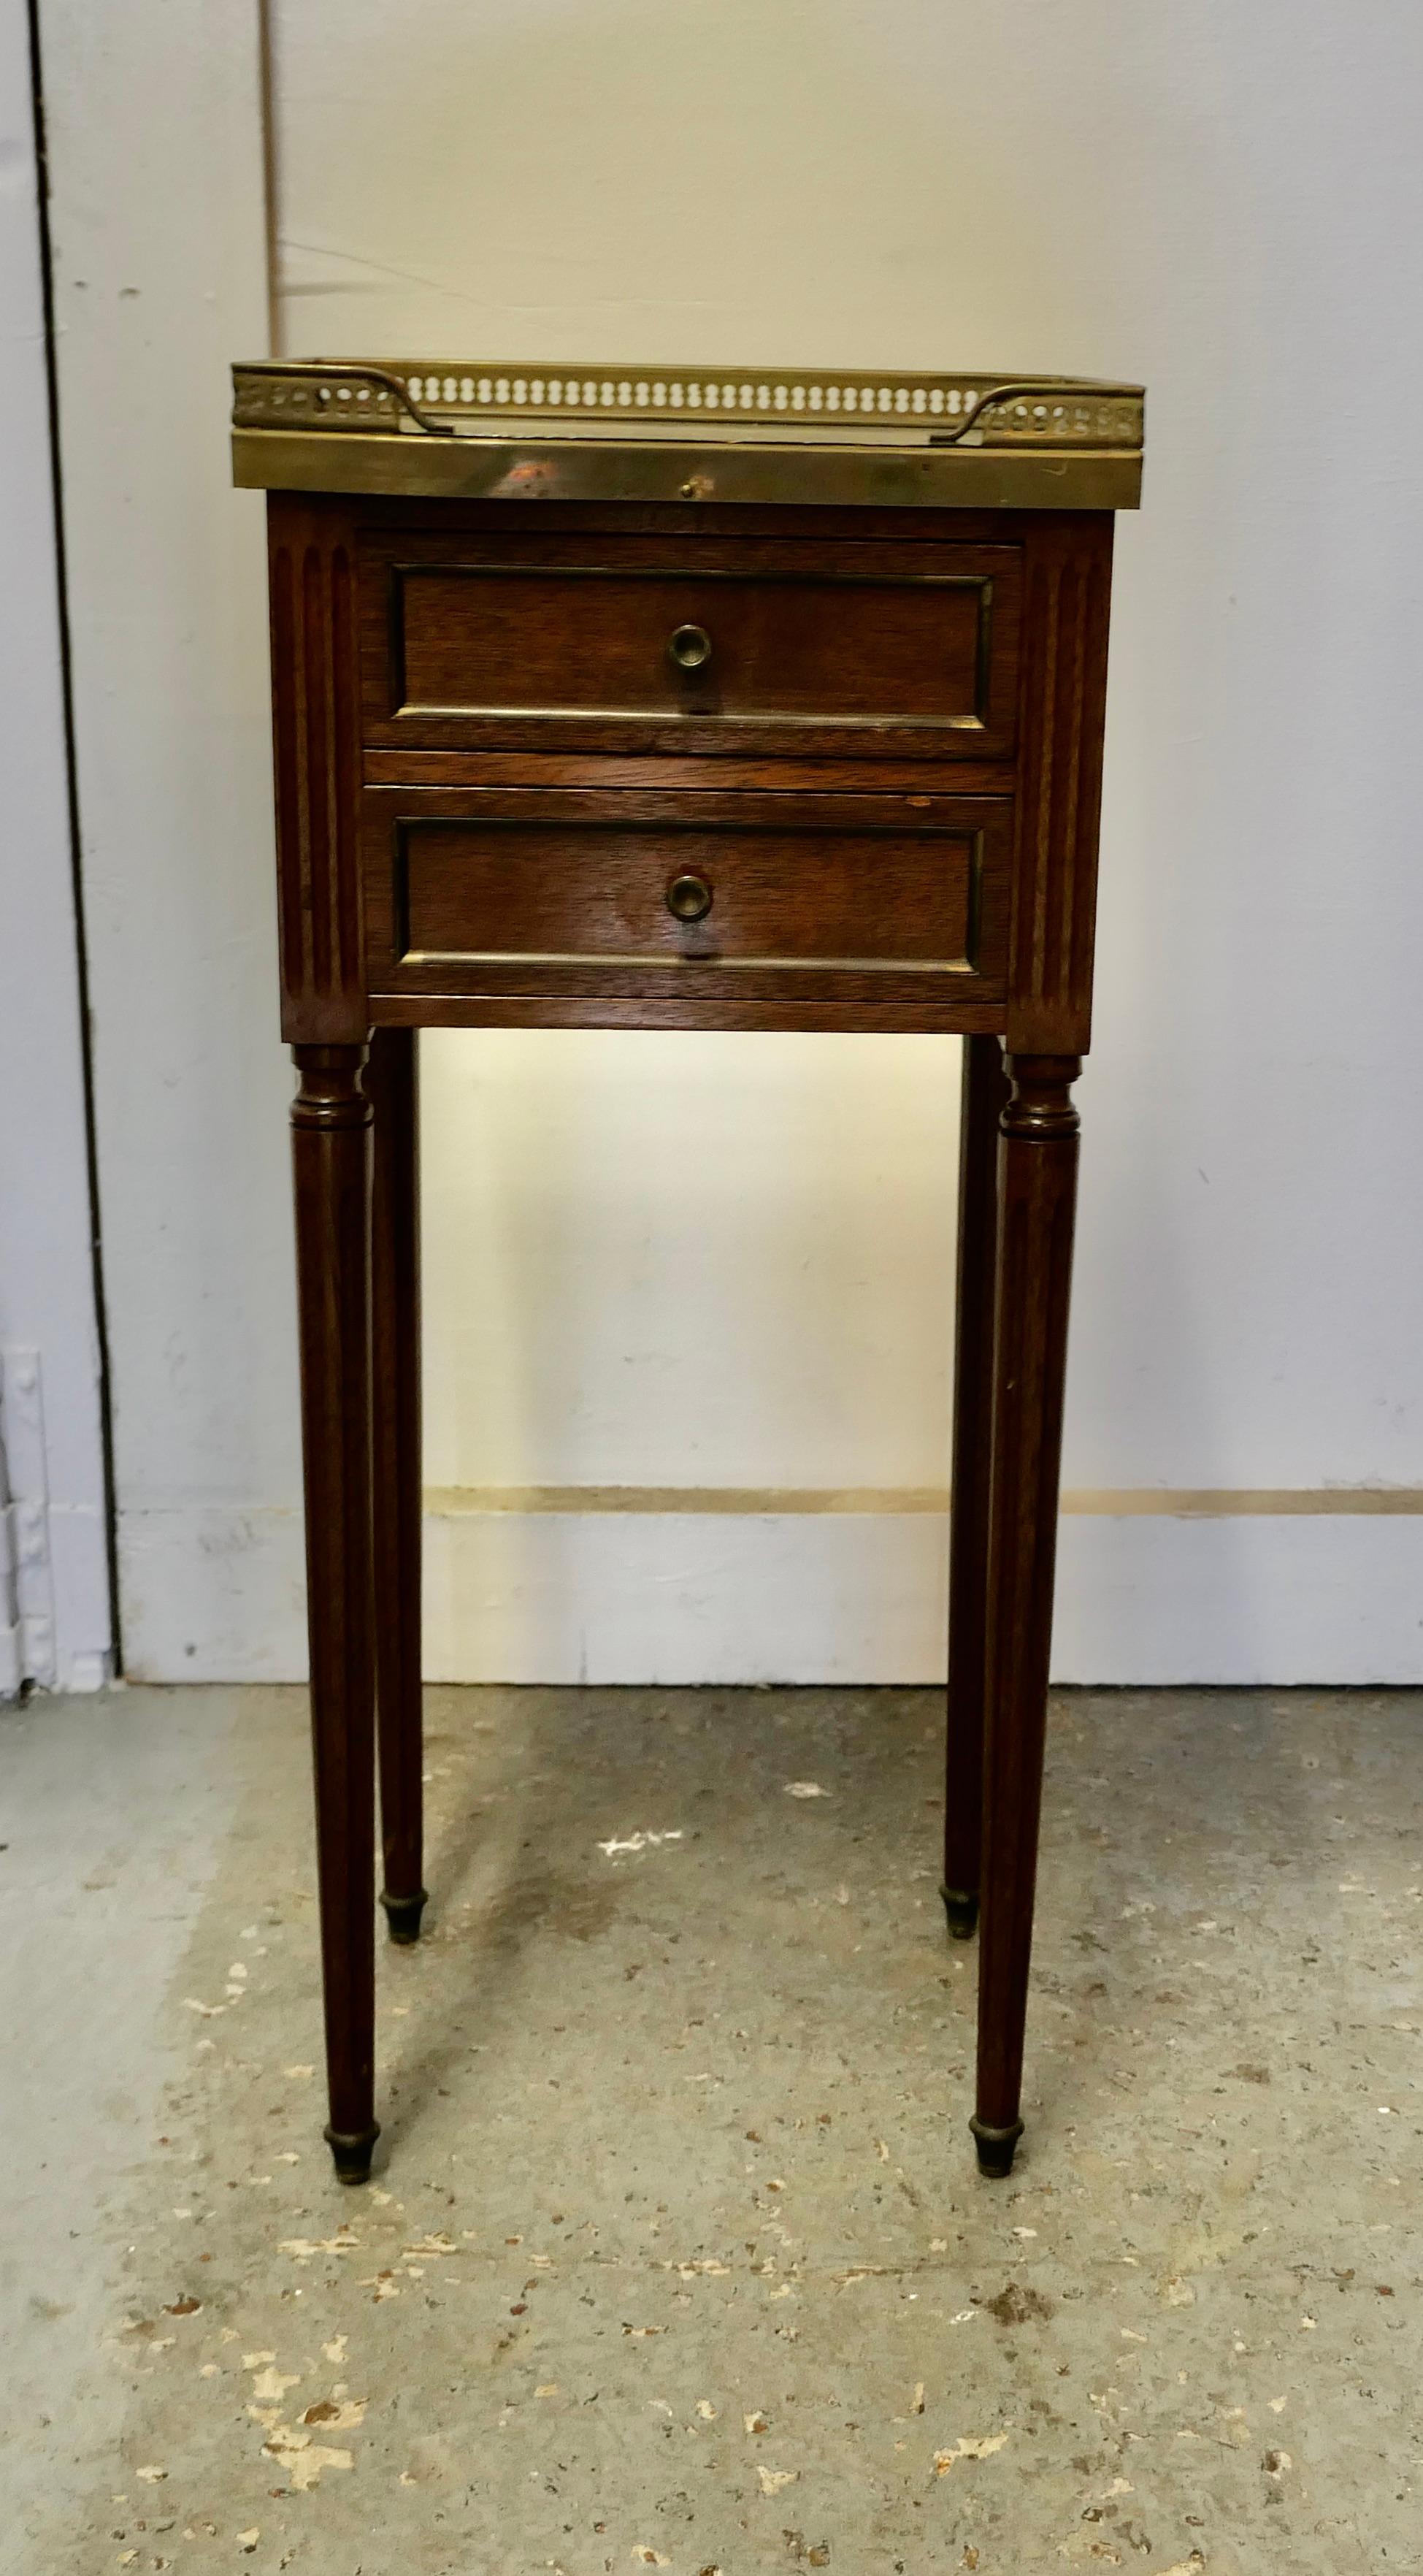 A French 19th Century side table or bedside cabinet 

This is a superb quality French 19th Century marble top table, it has a pierced brass gallery around the top and 2 small drawers to the front
The cabinet is in good condition and would work